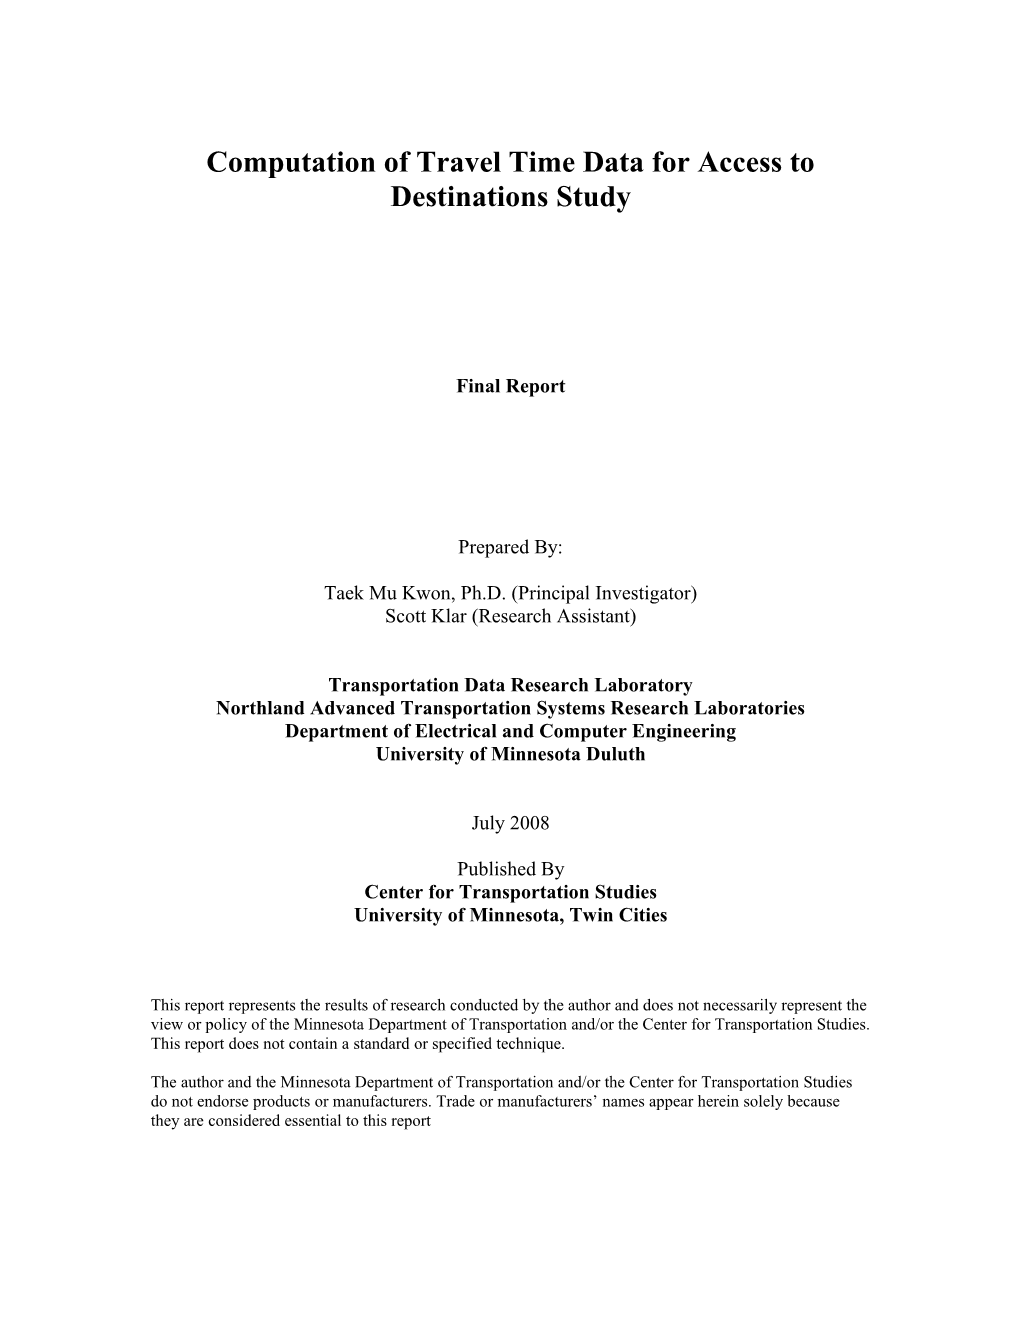 Computation of Travel Time Data for Access to Destinations Study